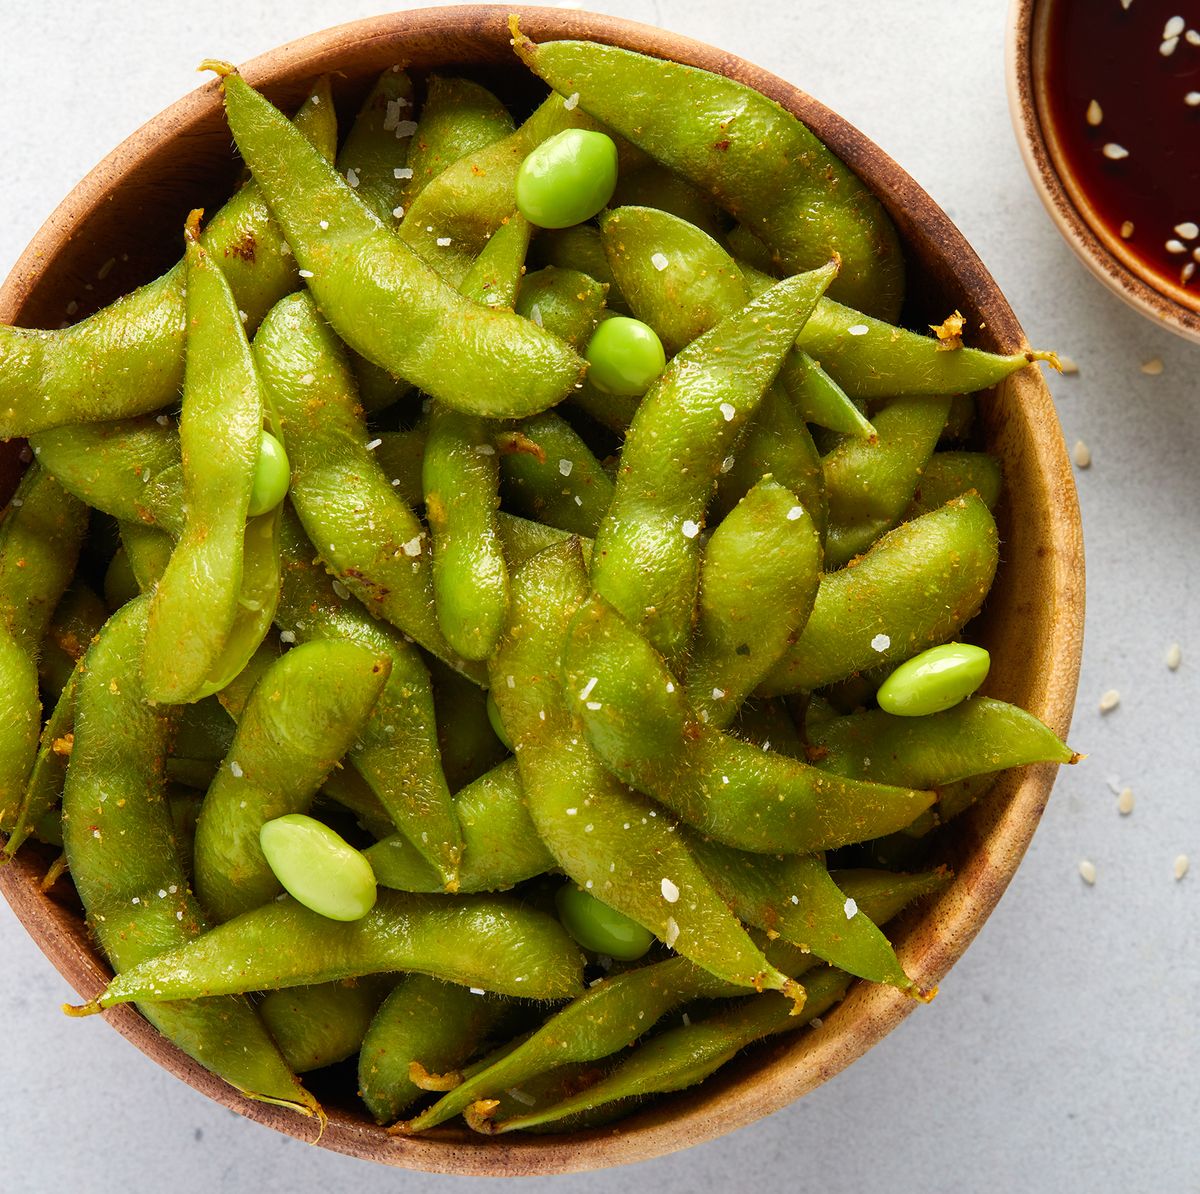 What Is Edamame?